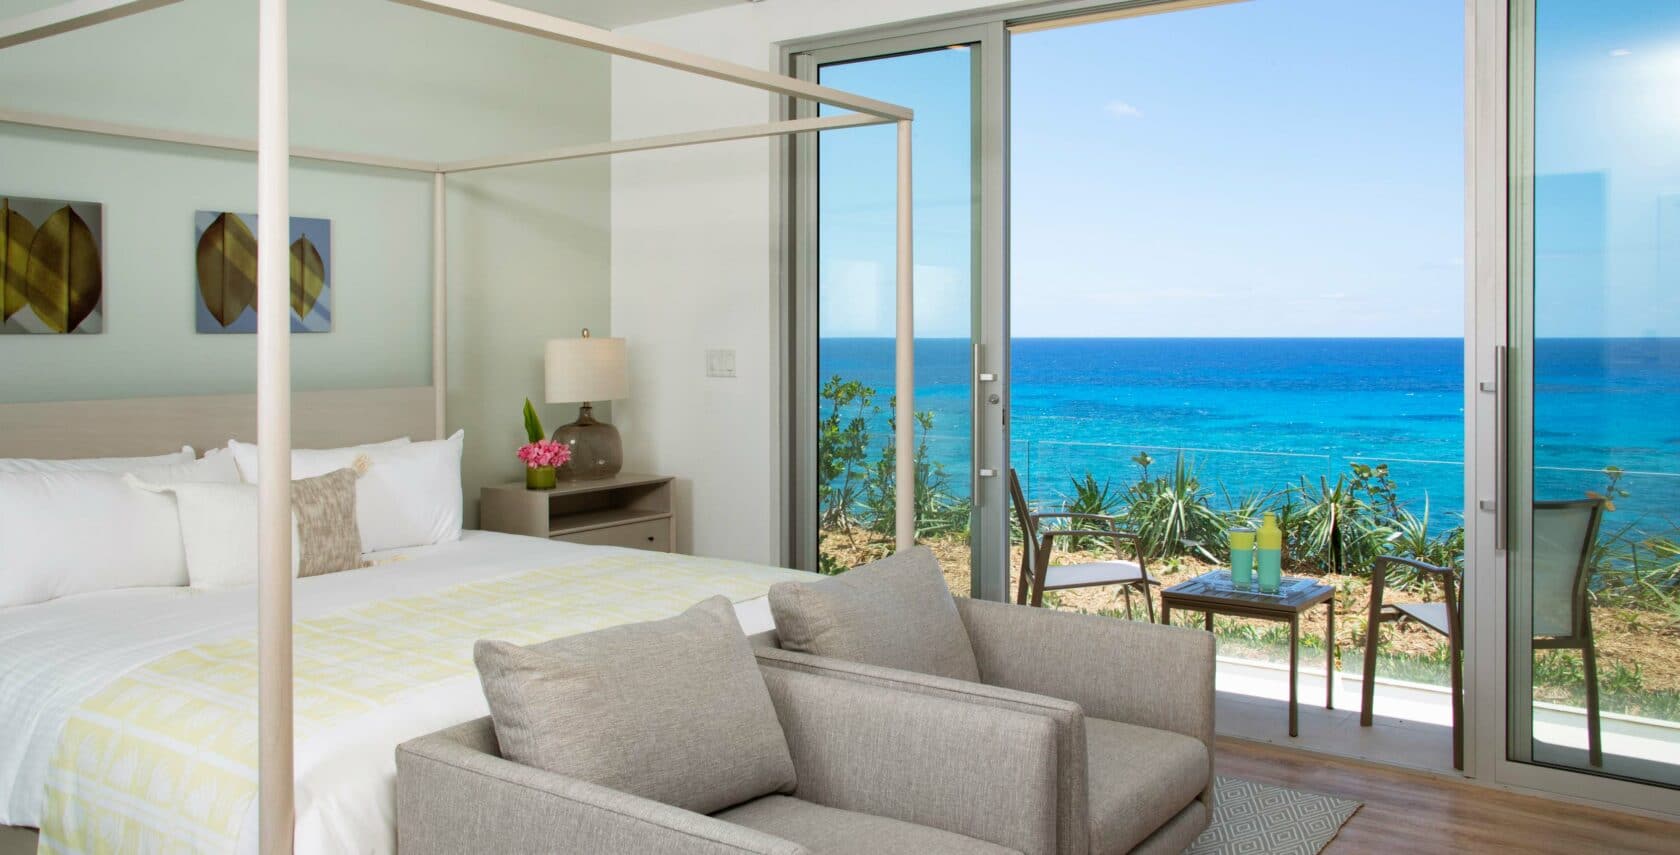 A bedroom with large sliding glass doors leading to a patio overlooking the ocean.